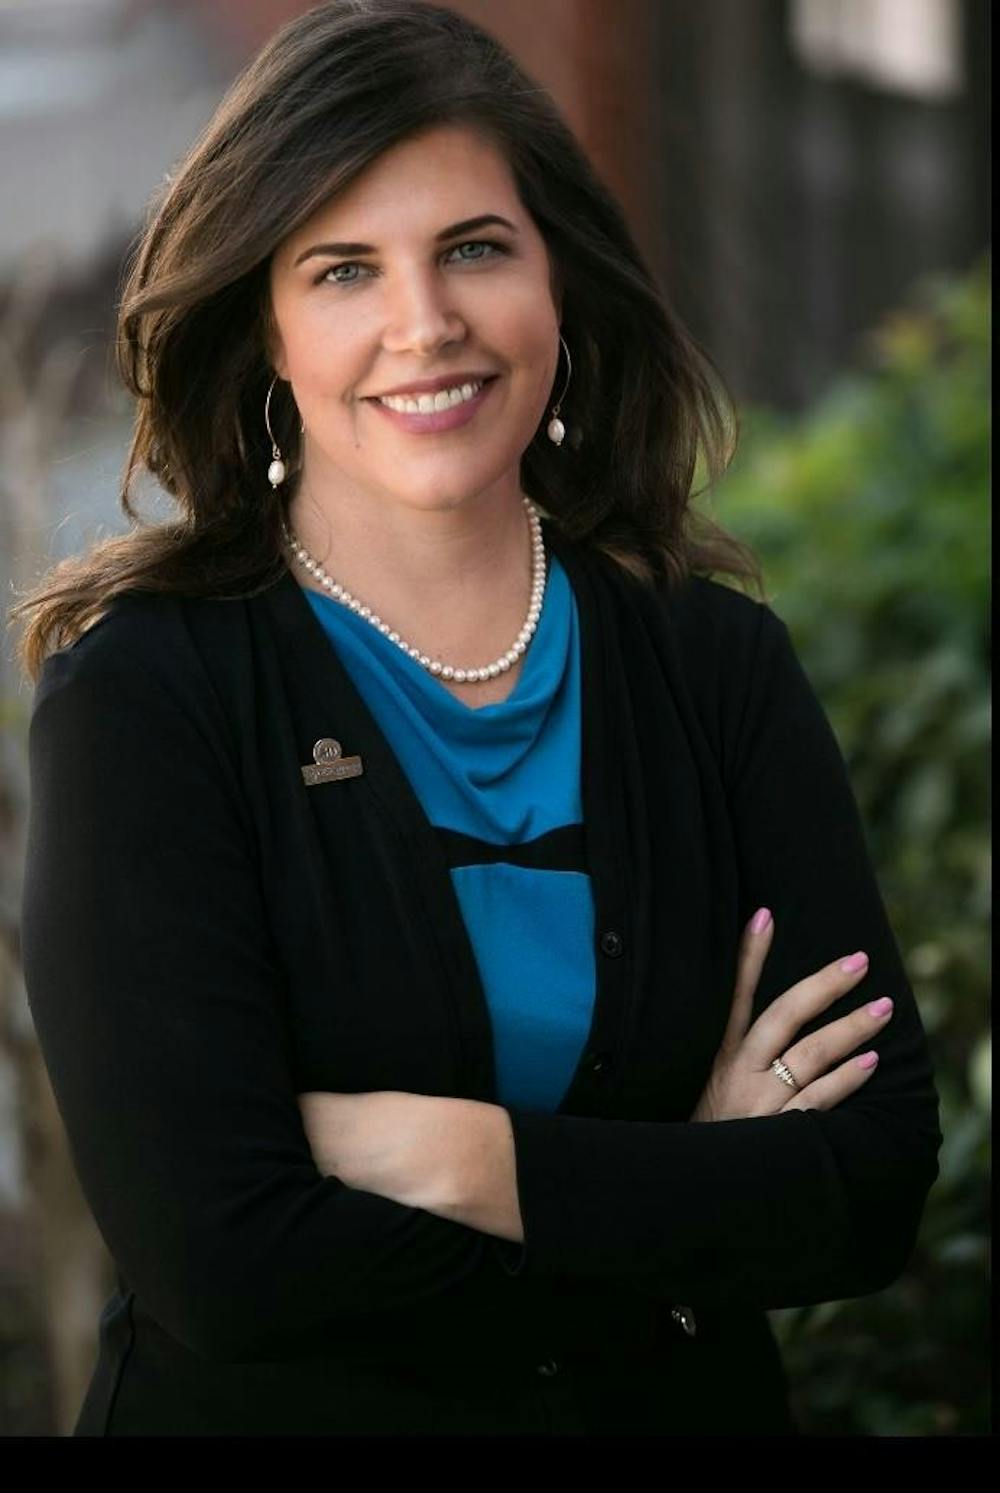 Kimberly Sanchez became the new executive director of the nonprofit Community Home Trust in 2020. She replaced Robert Dowling. Photo courtesy of TKTK.